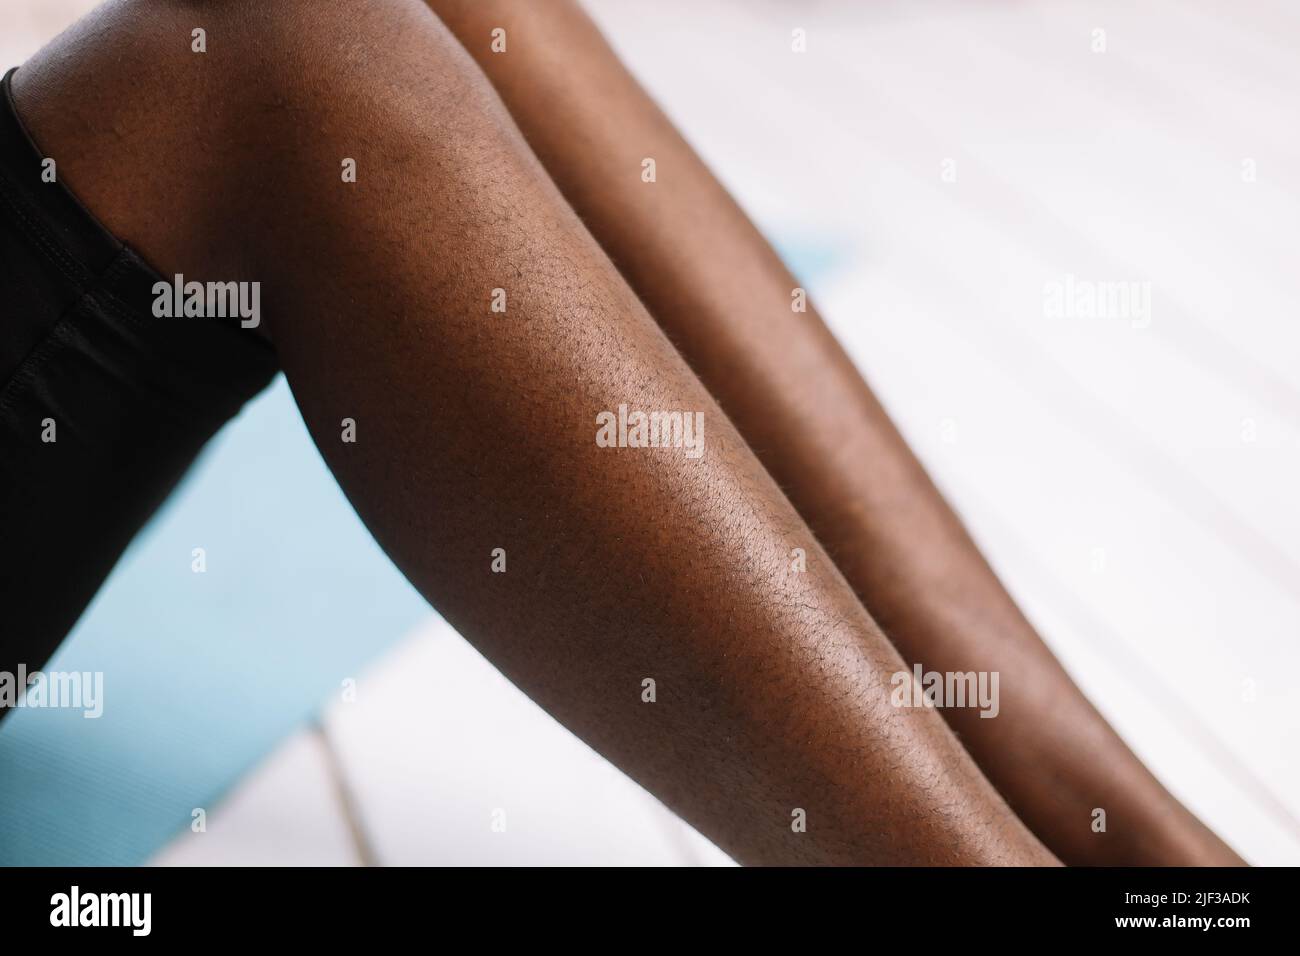 Bare legs of afro american woman closeup, blurred background free copy space. Black person lying with bent legs. Hairy and unshaven legs, new normal Stock Photo